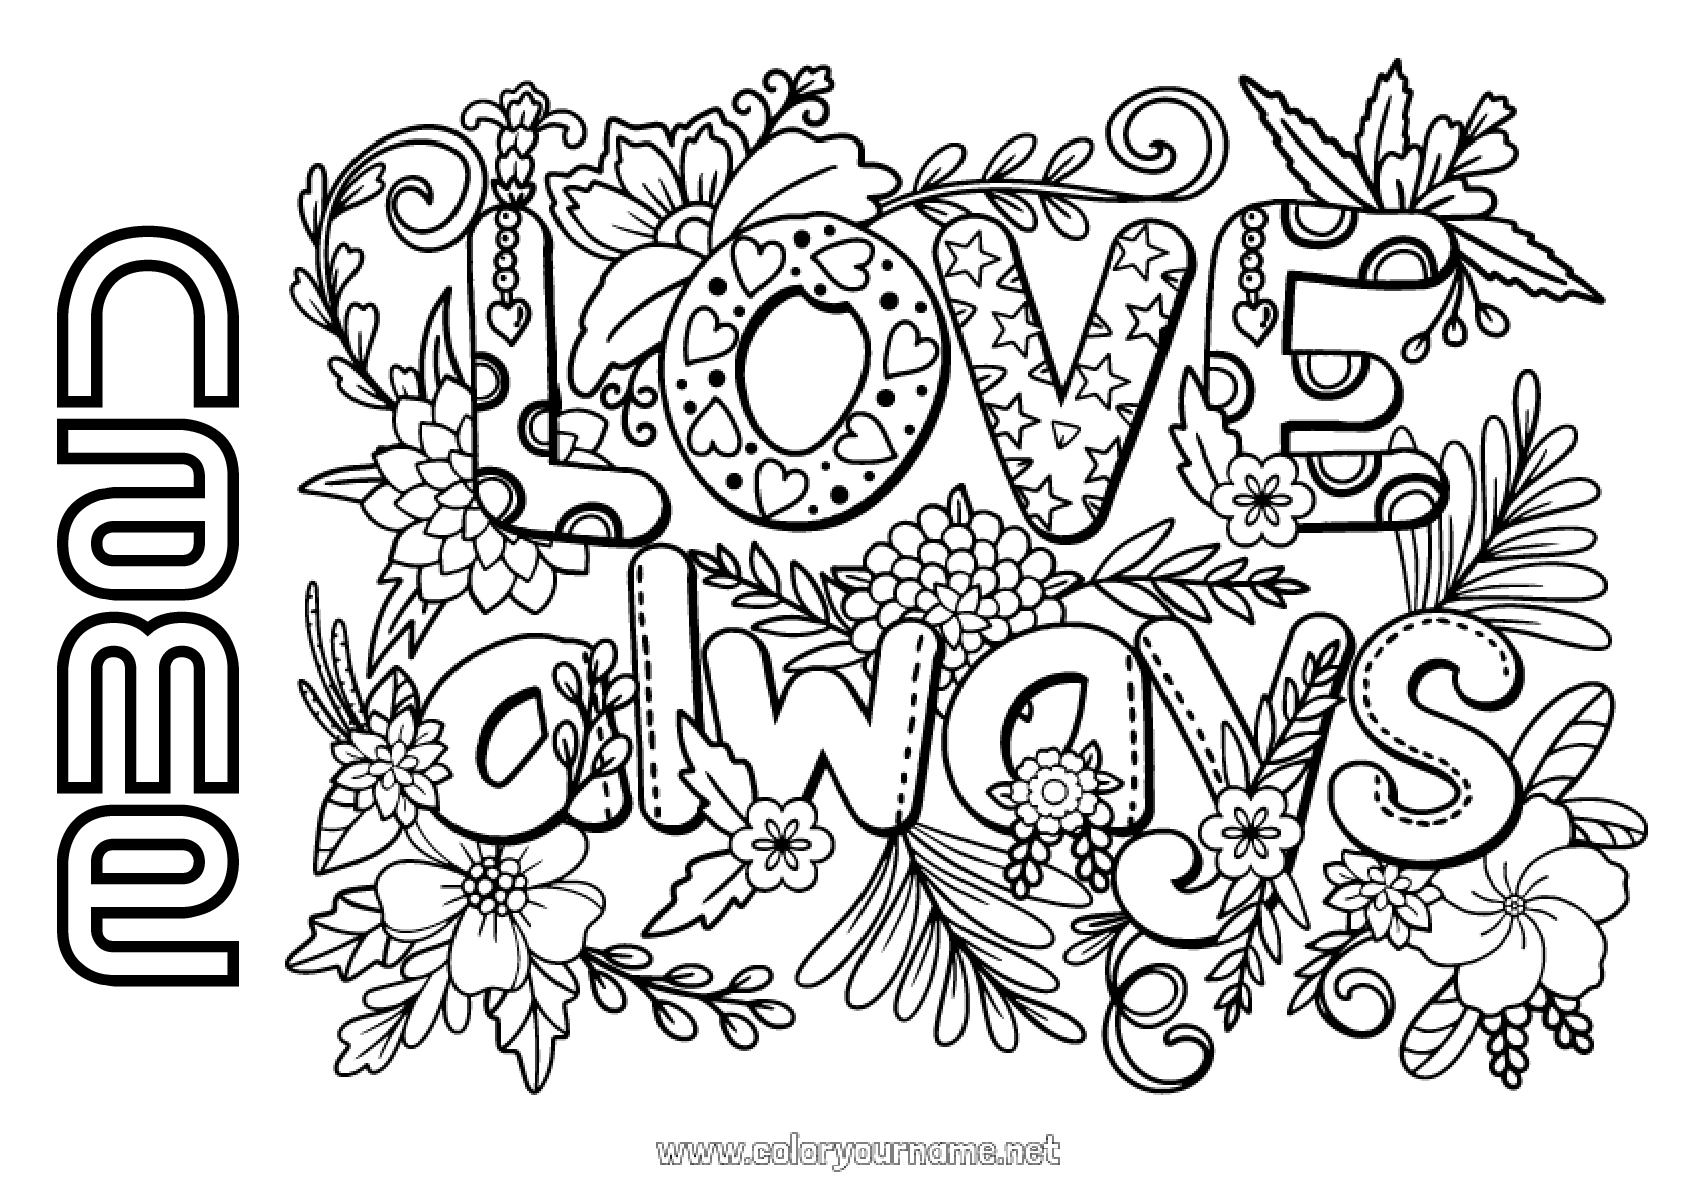 Coloring page No.1022 - Flowers I love you Valentine's Day